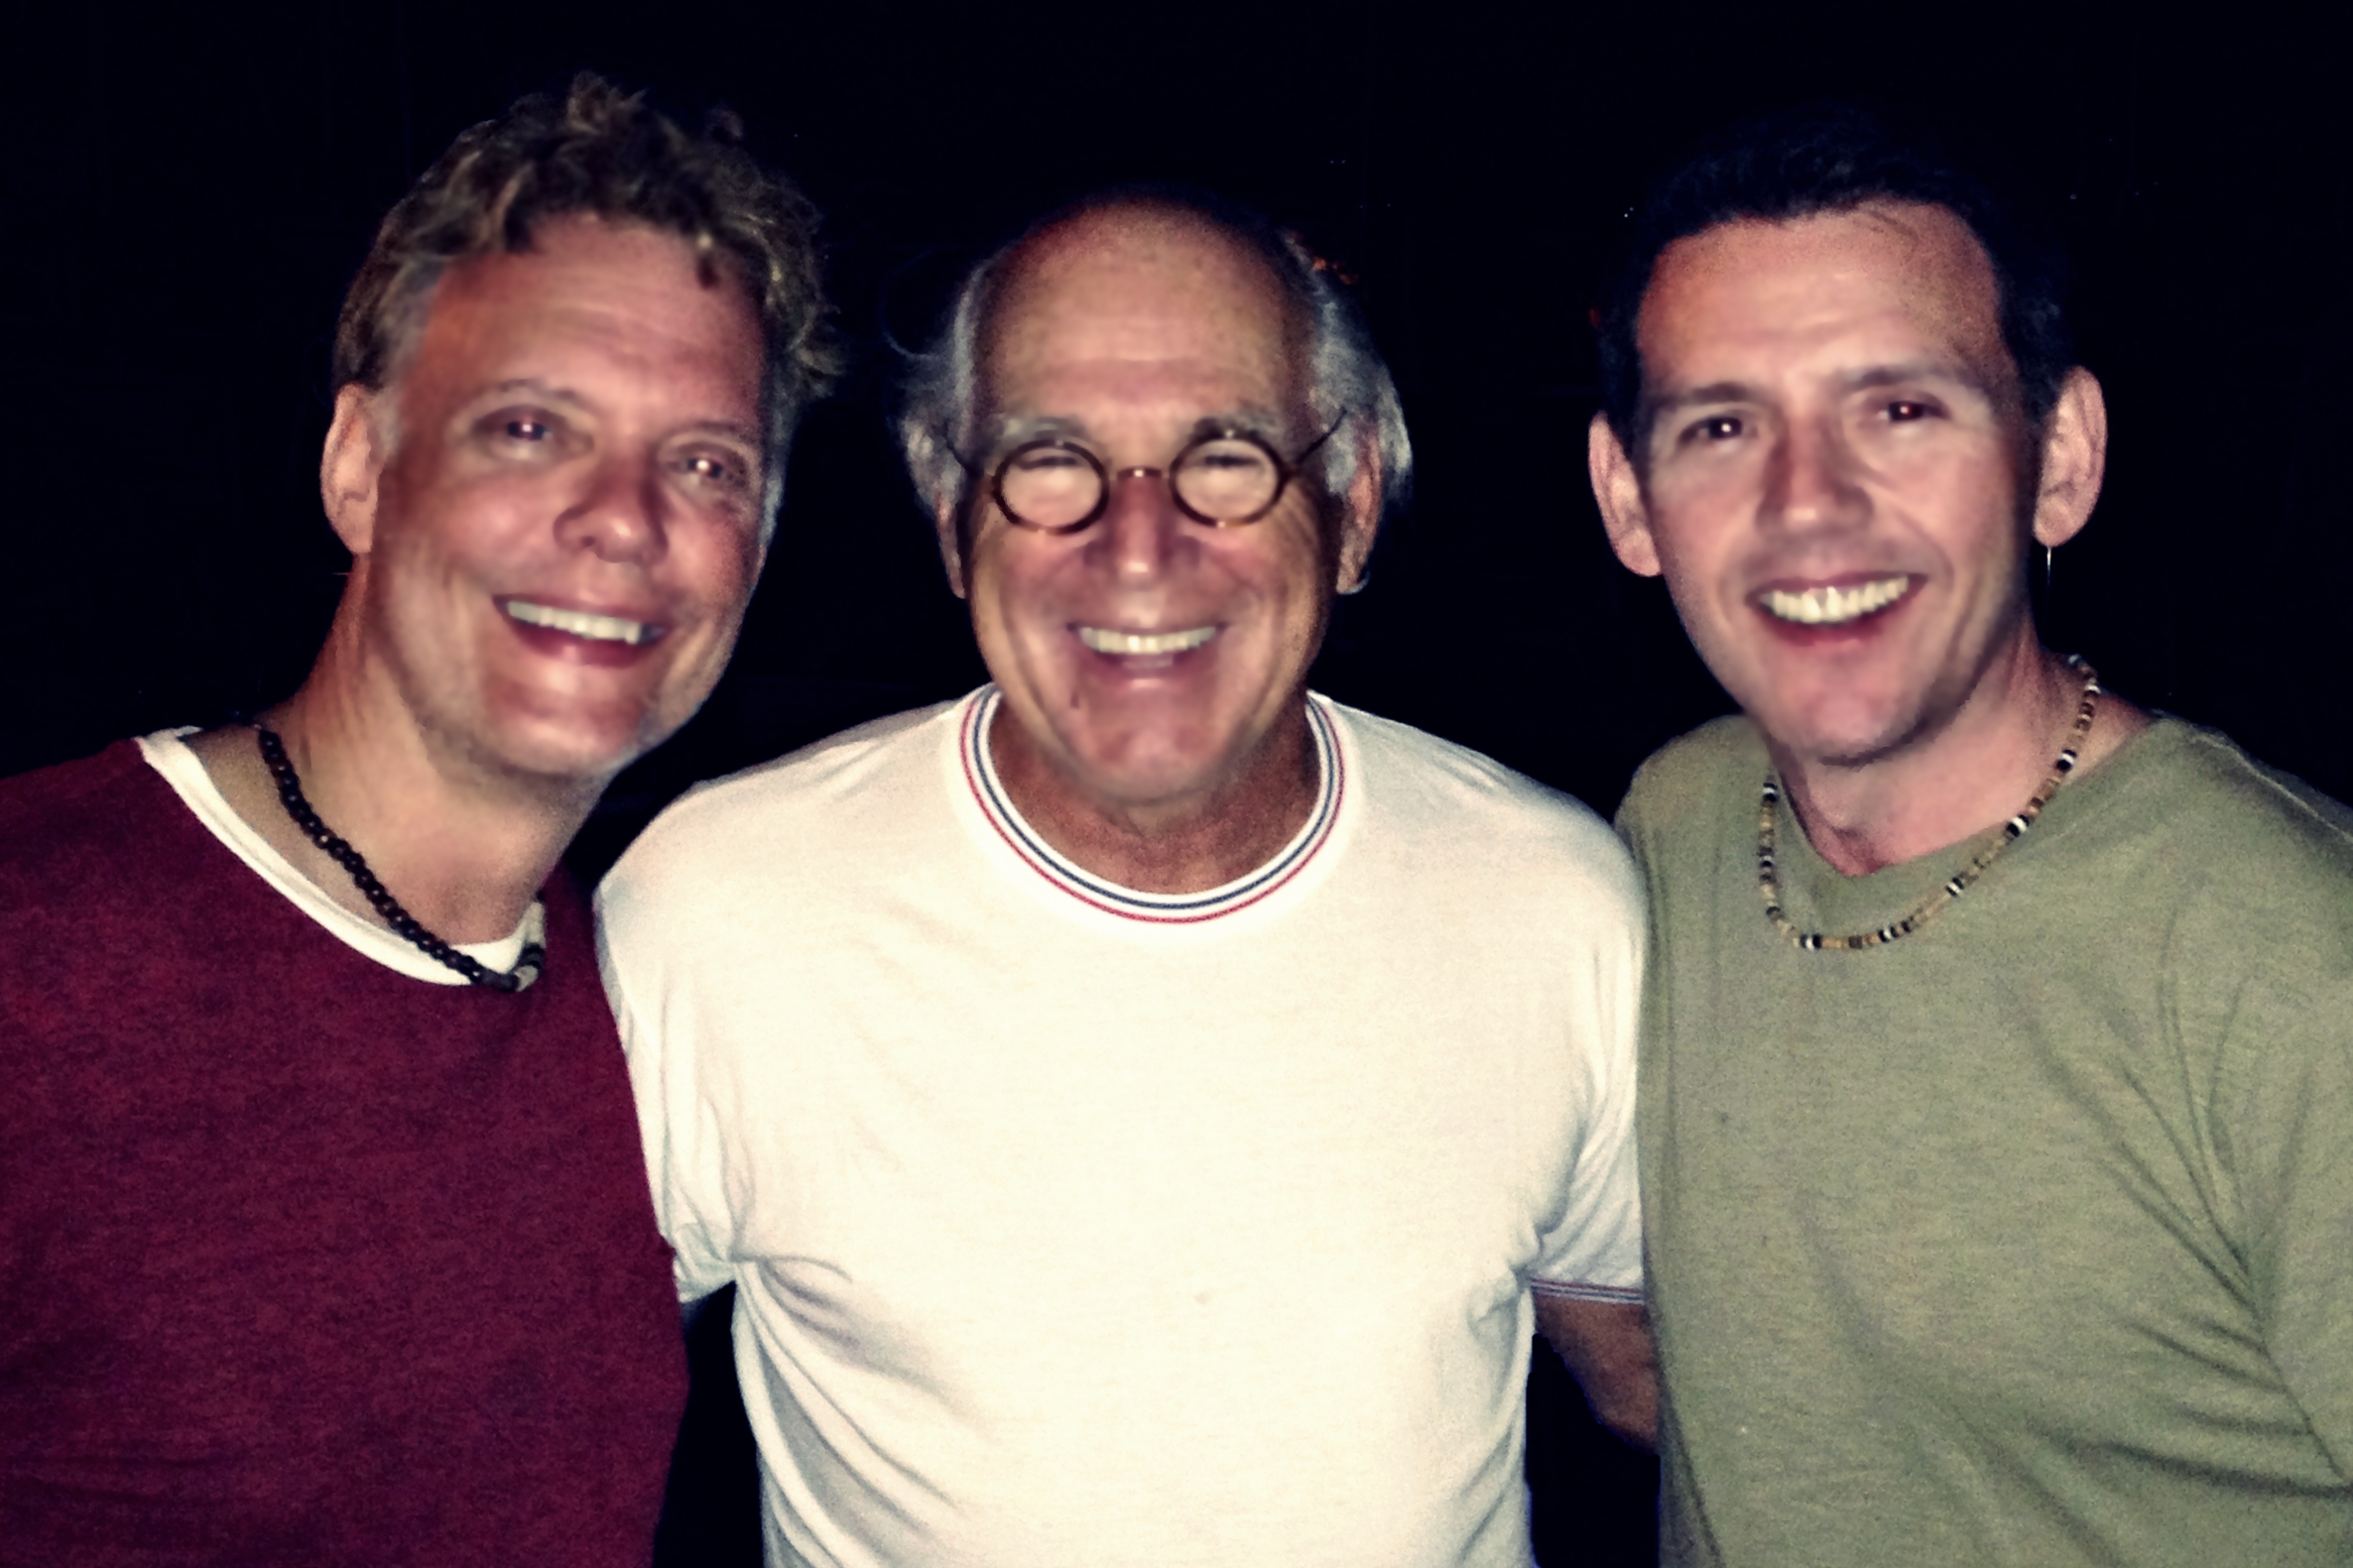 David Salyers at Bagatelle, St. Barts with Jimmy Buffett and Jim Gregory (February 2014) http://www.buffettworld.com/